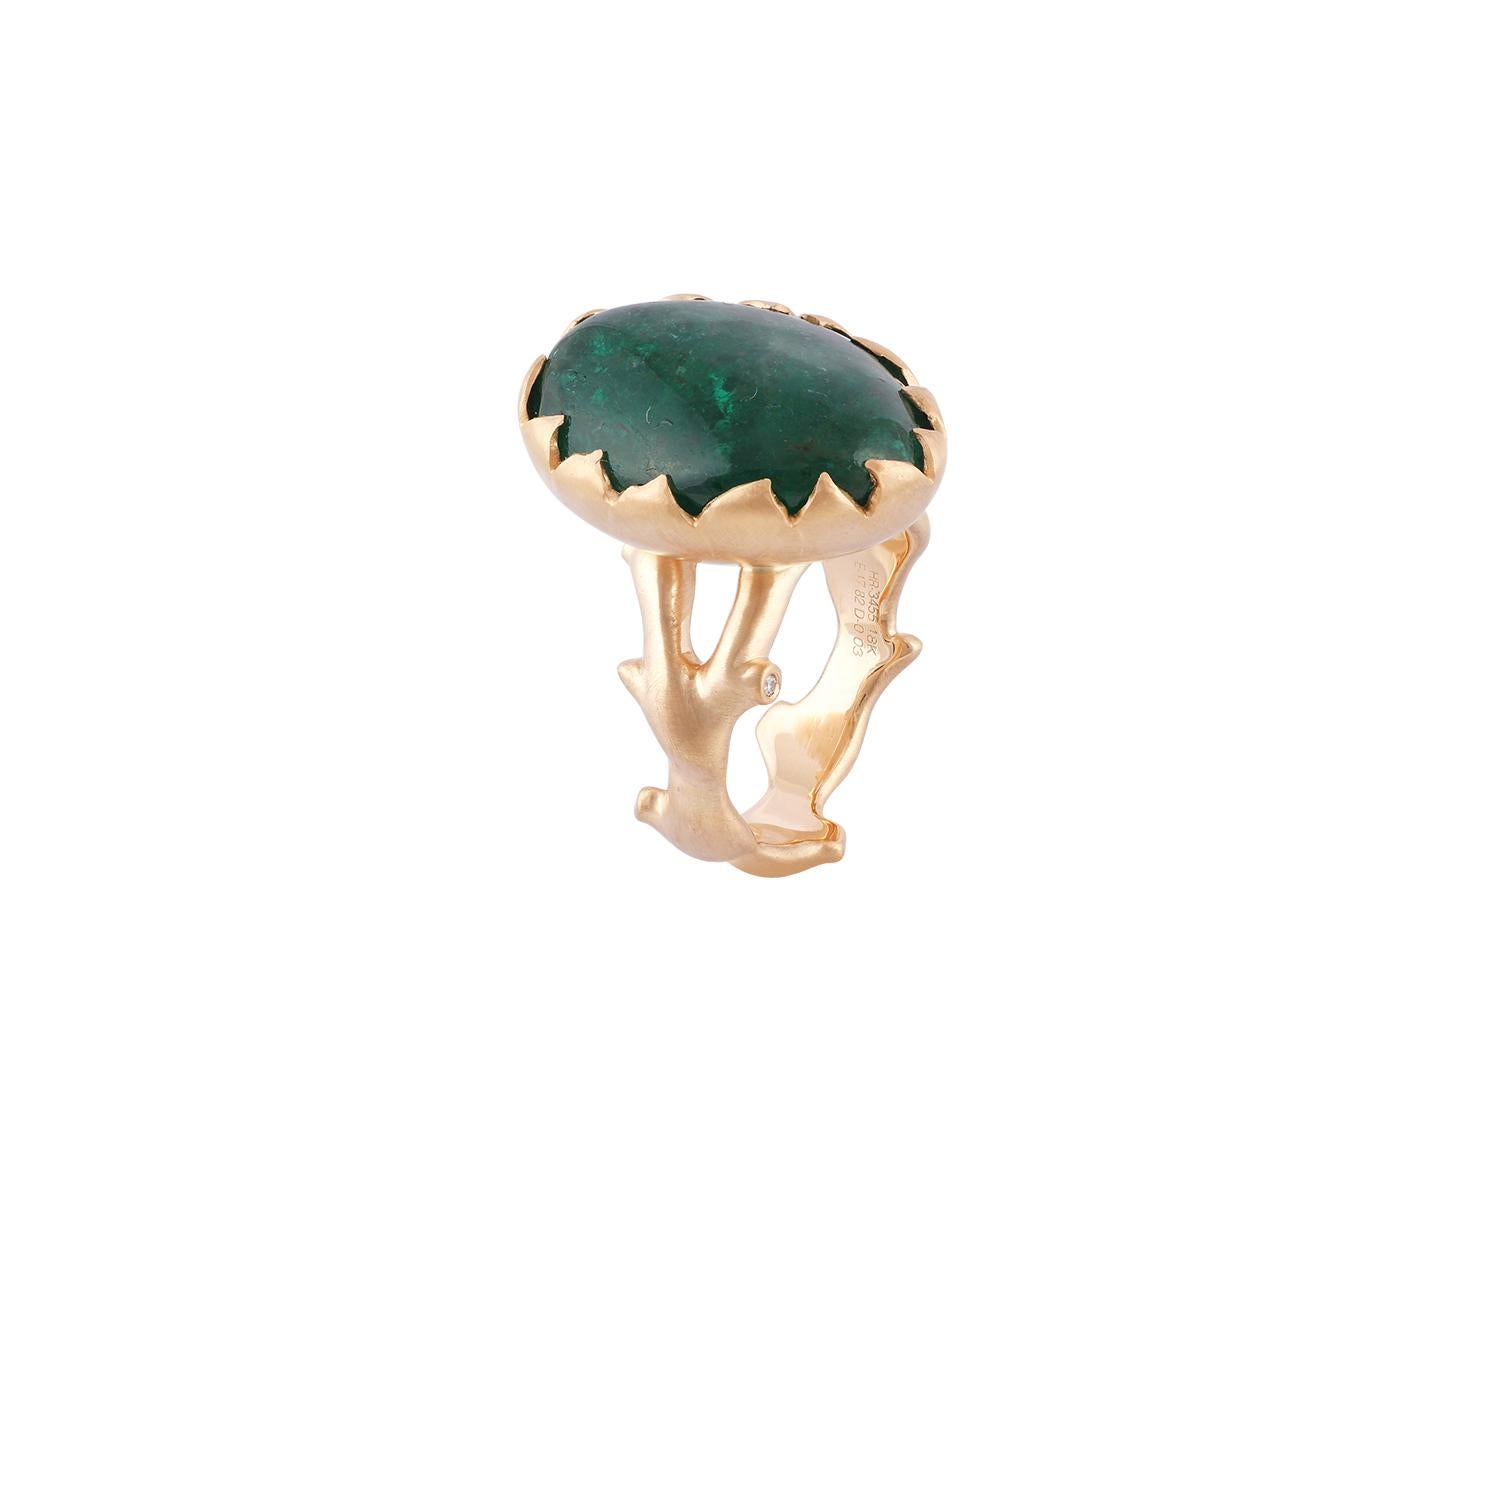 17.82 Carat Cabochon Zambian Emerald  & Diamond Ring in 18k Yellow Gold   In New Condition For Sale In Jaipur, Rajasthan